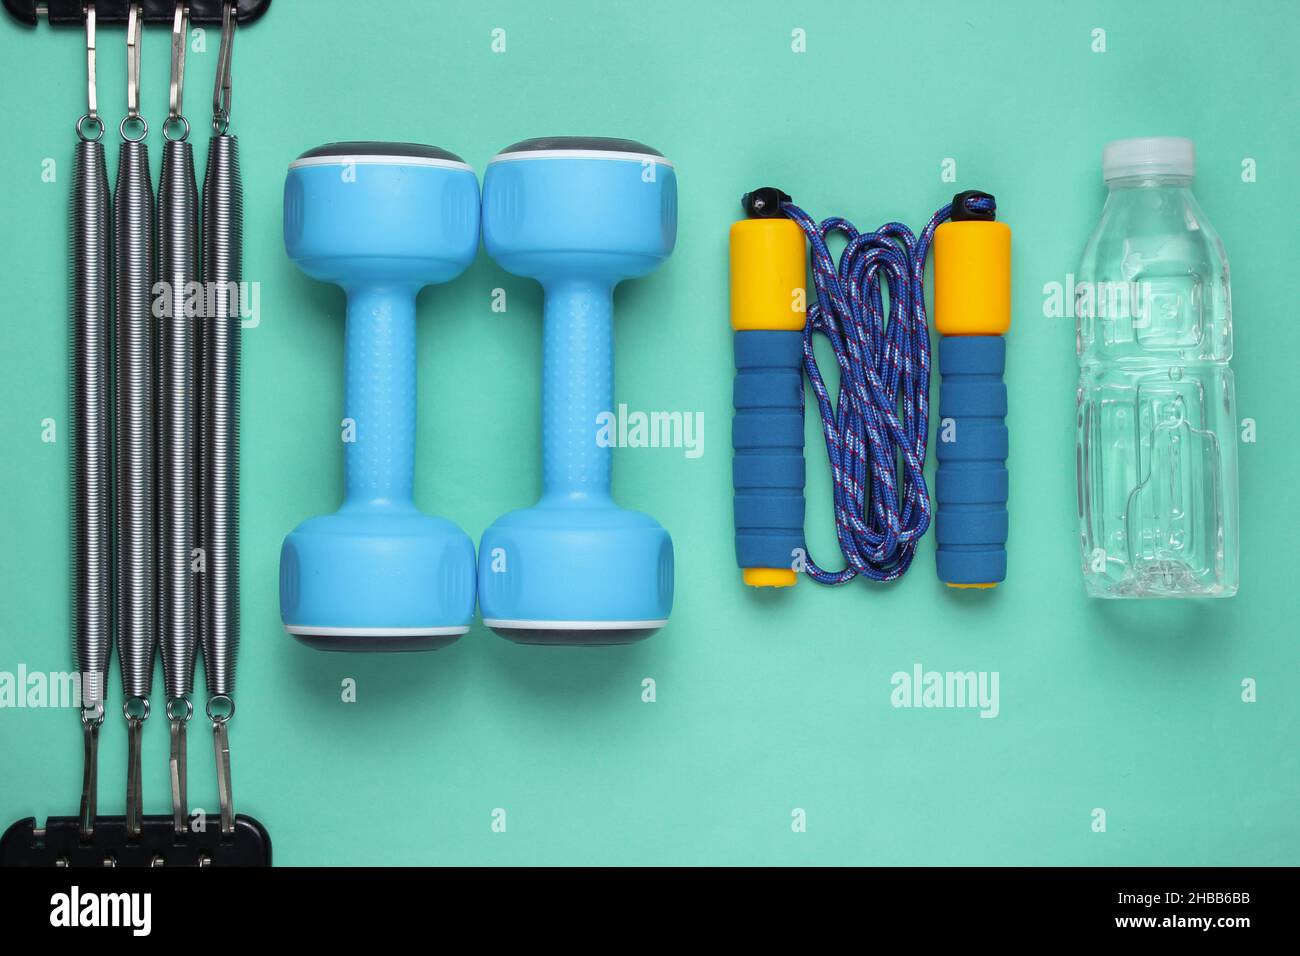 Fitness background. Equipment for gym and home. Jump rope, dumbbells,  expander, water on pastel pink background top view copy space Stock Photo